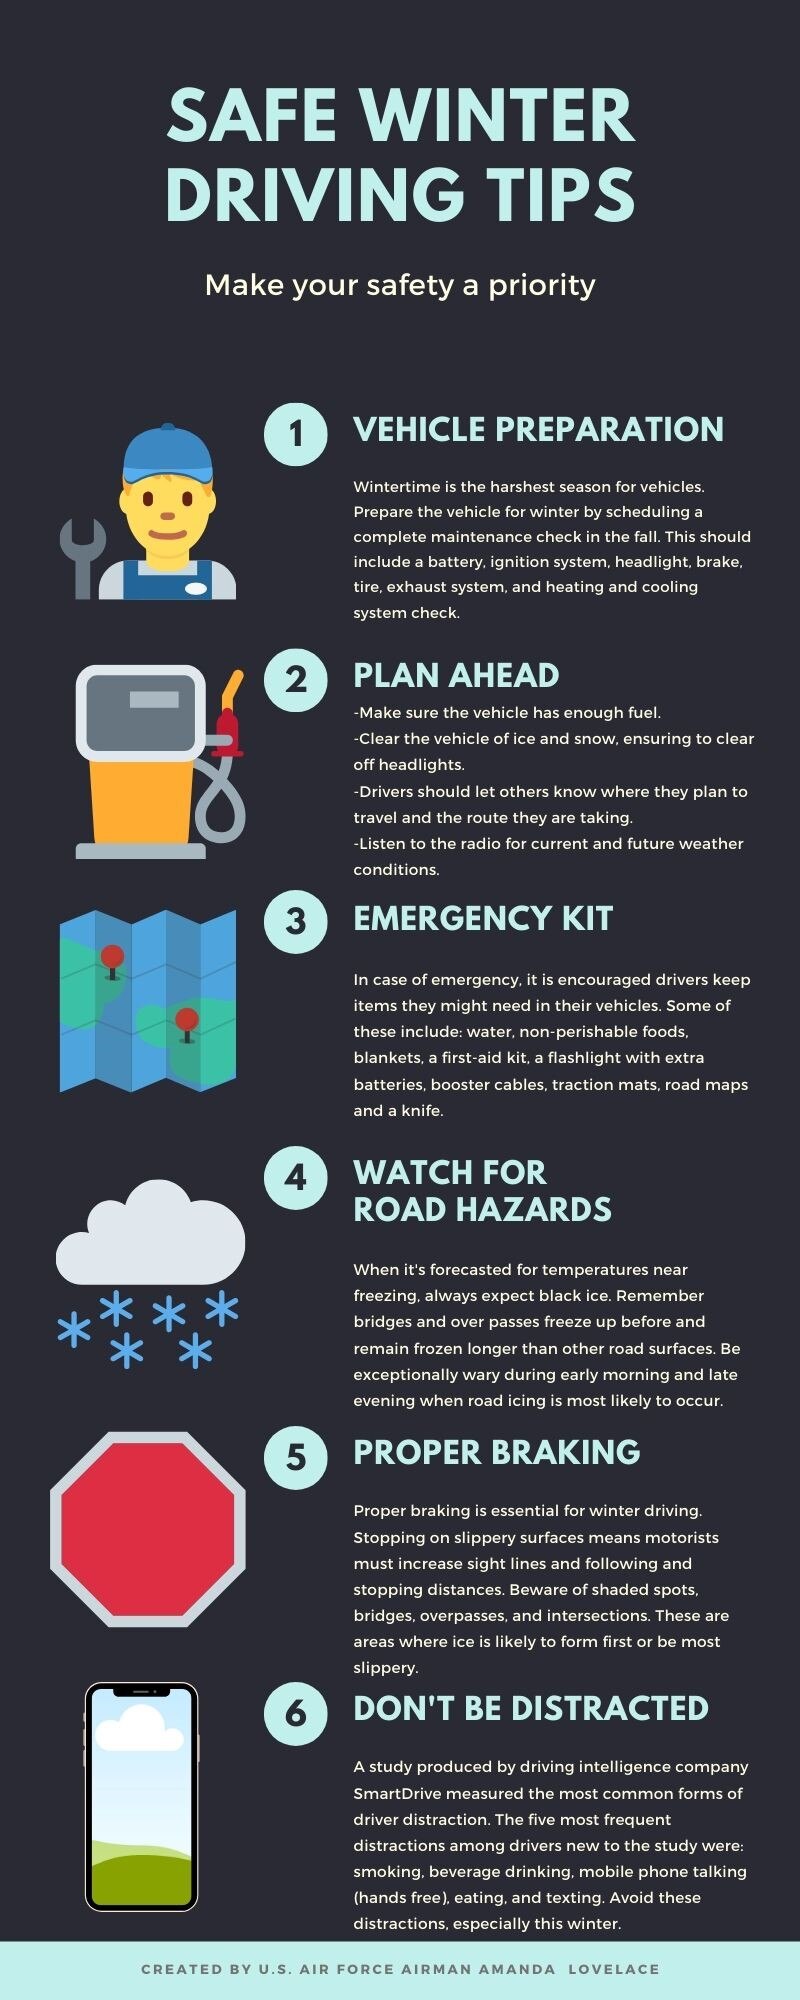 As winter approaches, it’s important drivers start taking precautions to ensure they are ready for traveling in inclement weather.